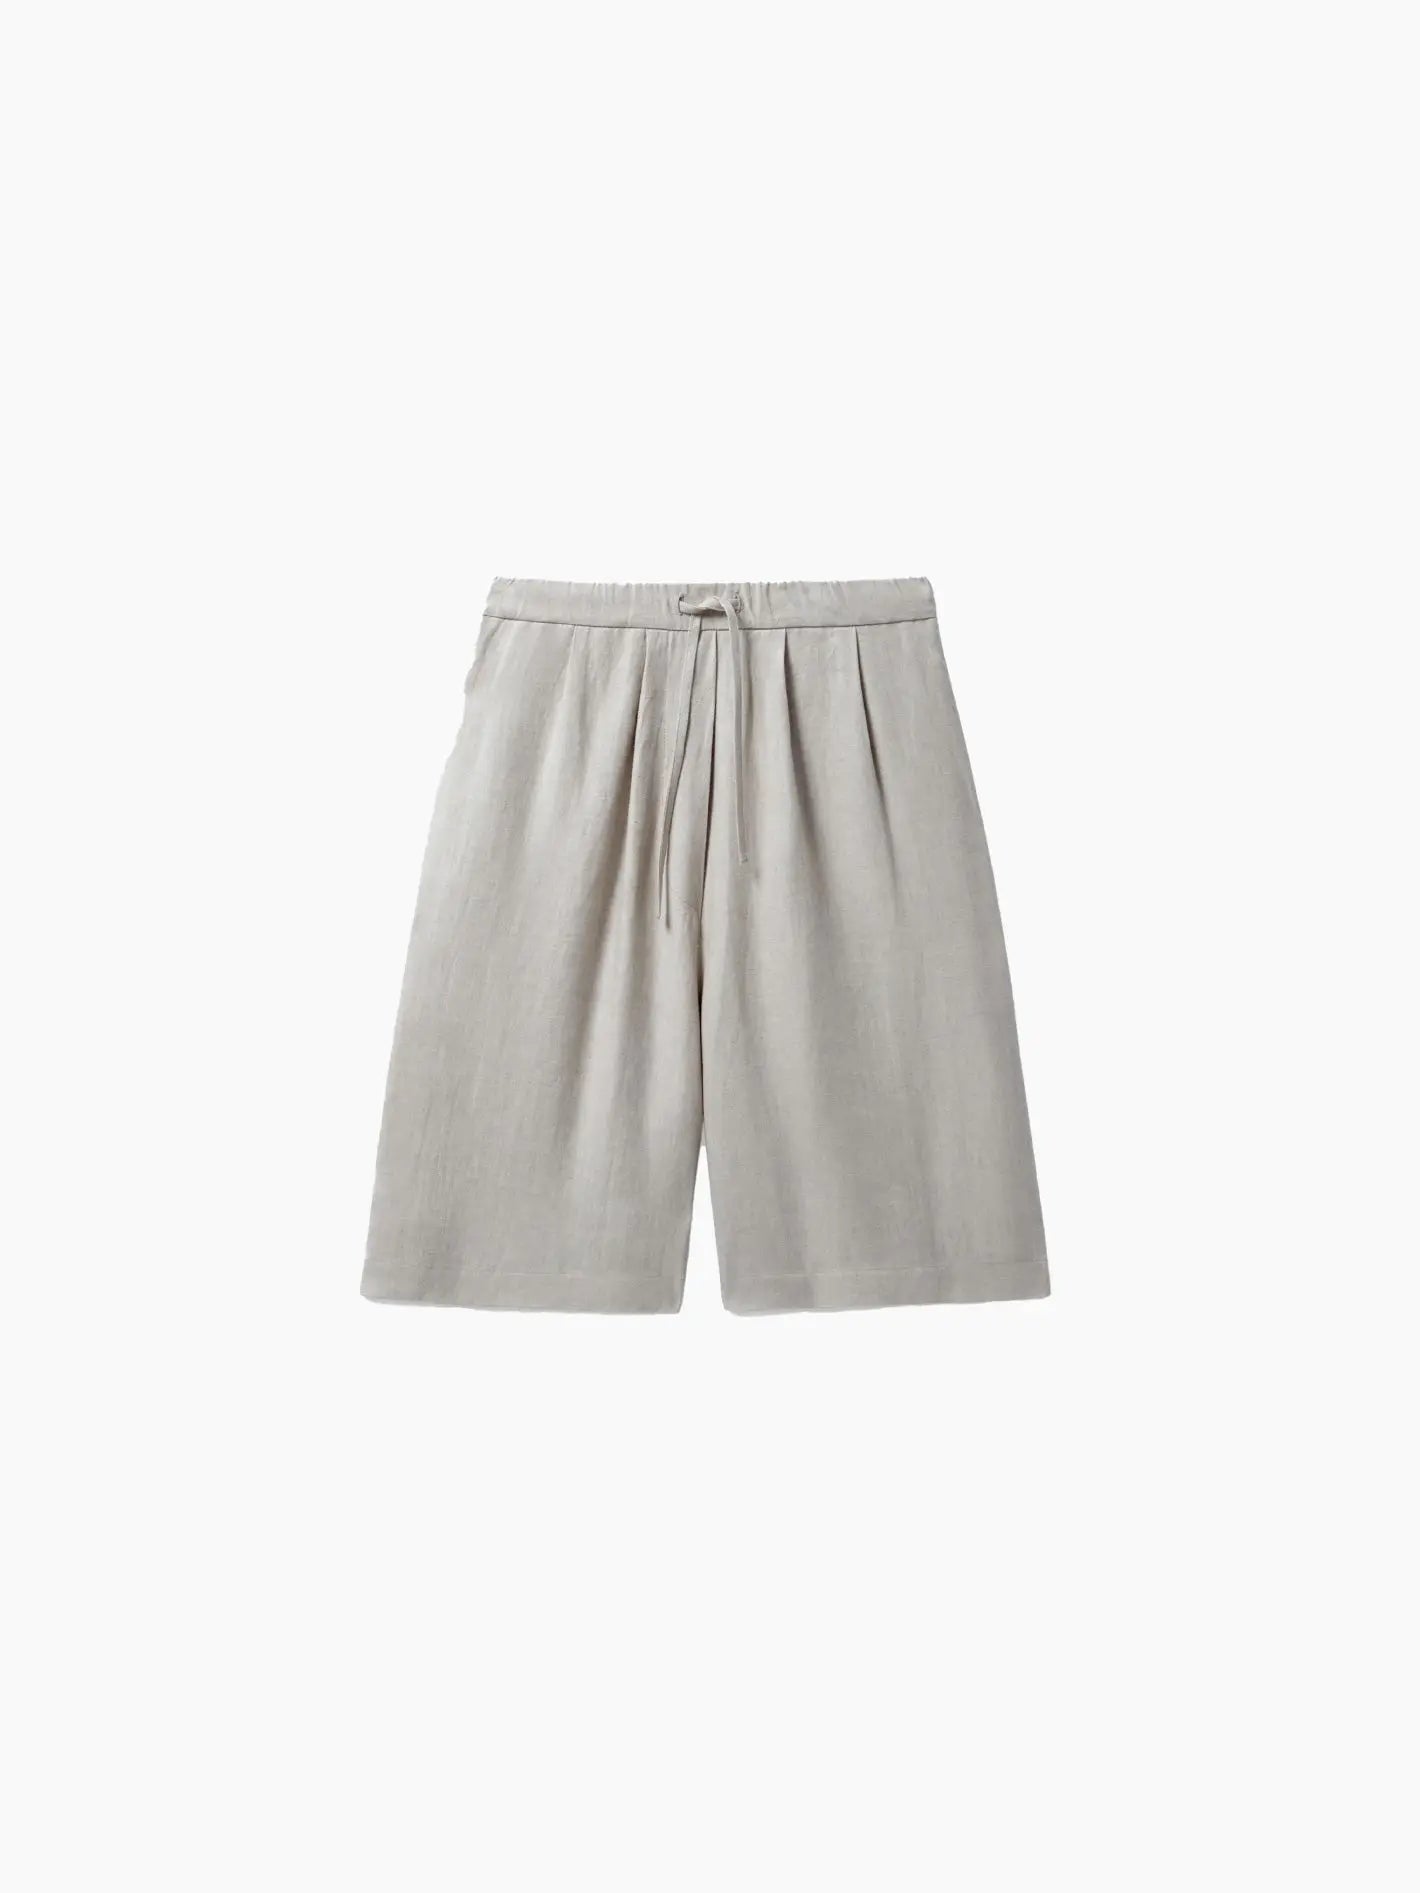 A pair of Cordera Linen Maxi Bermuda Toasted shorts with an elastic waistband and a drawstring tie. The shorts are knee-length with a slightly relaxed fit, perfect for strolling through the streets of Barcelona.